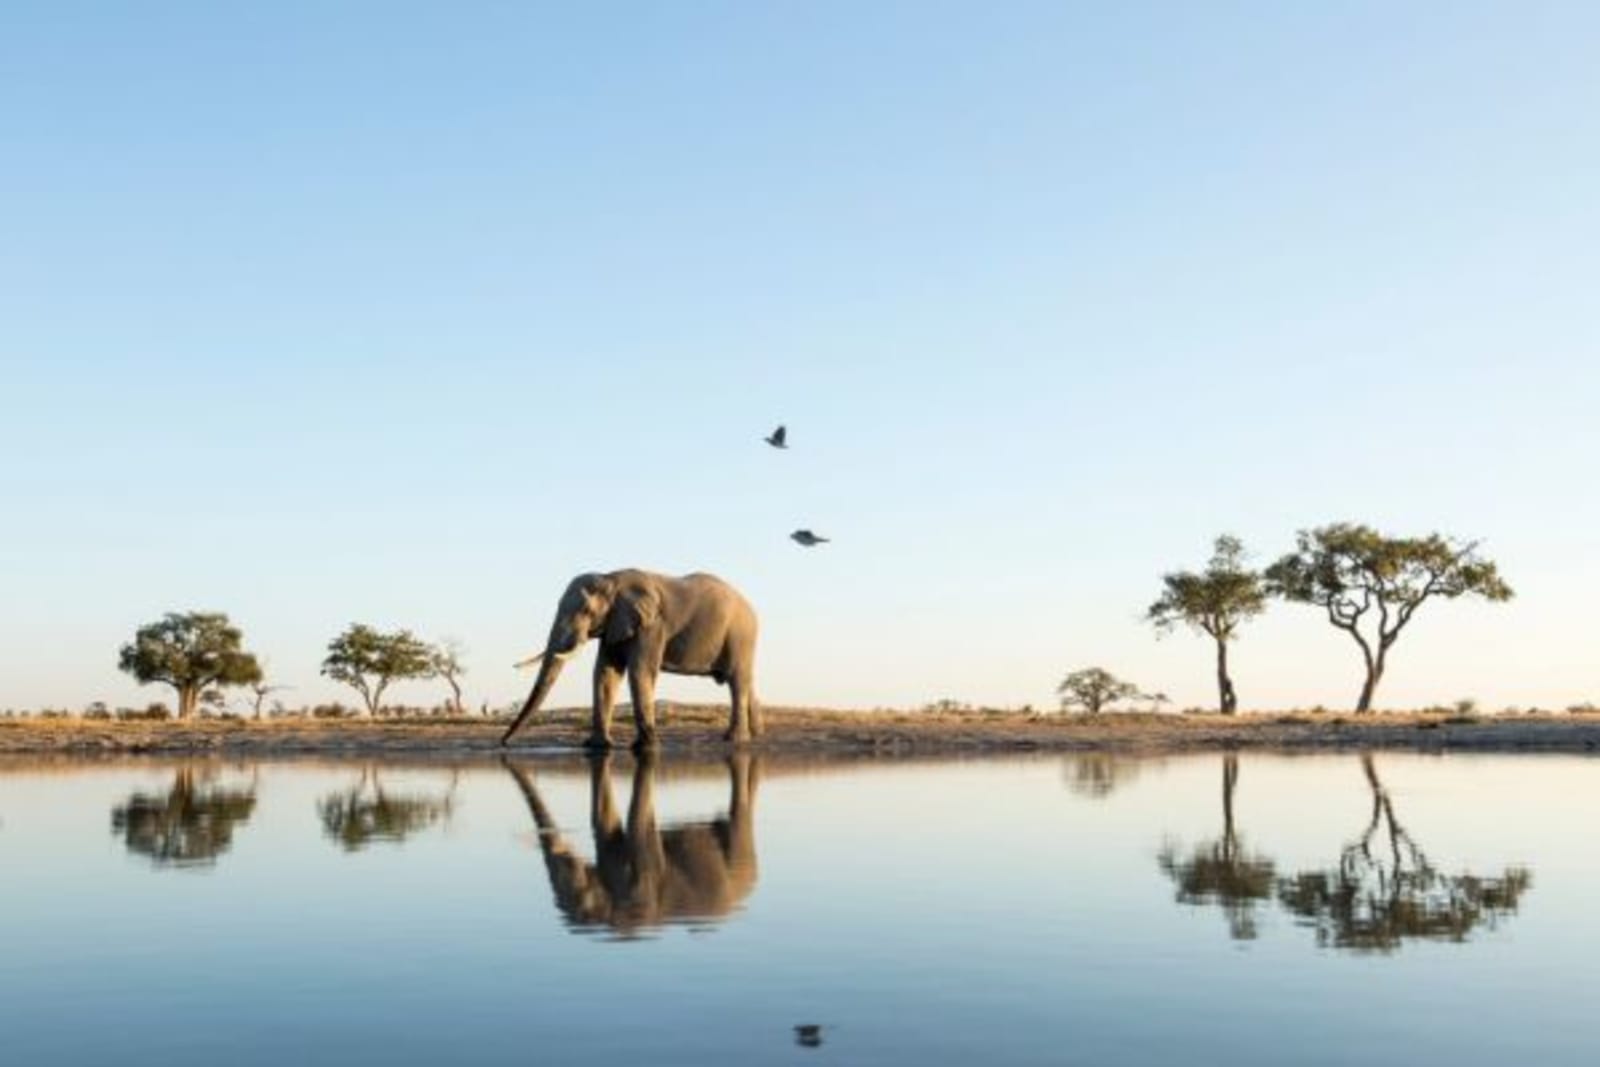 Elephant walking past a water hole with sunset in background